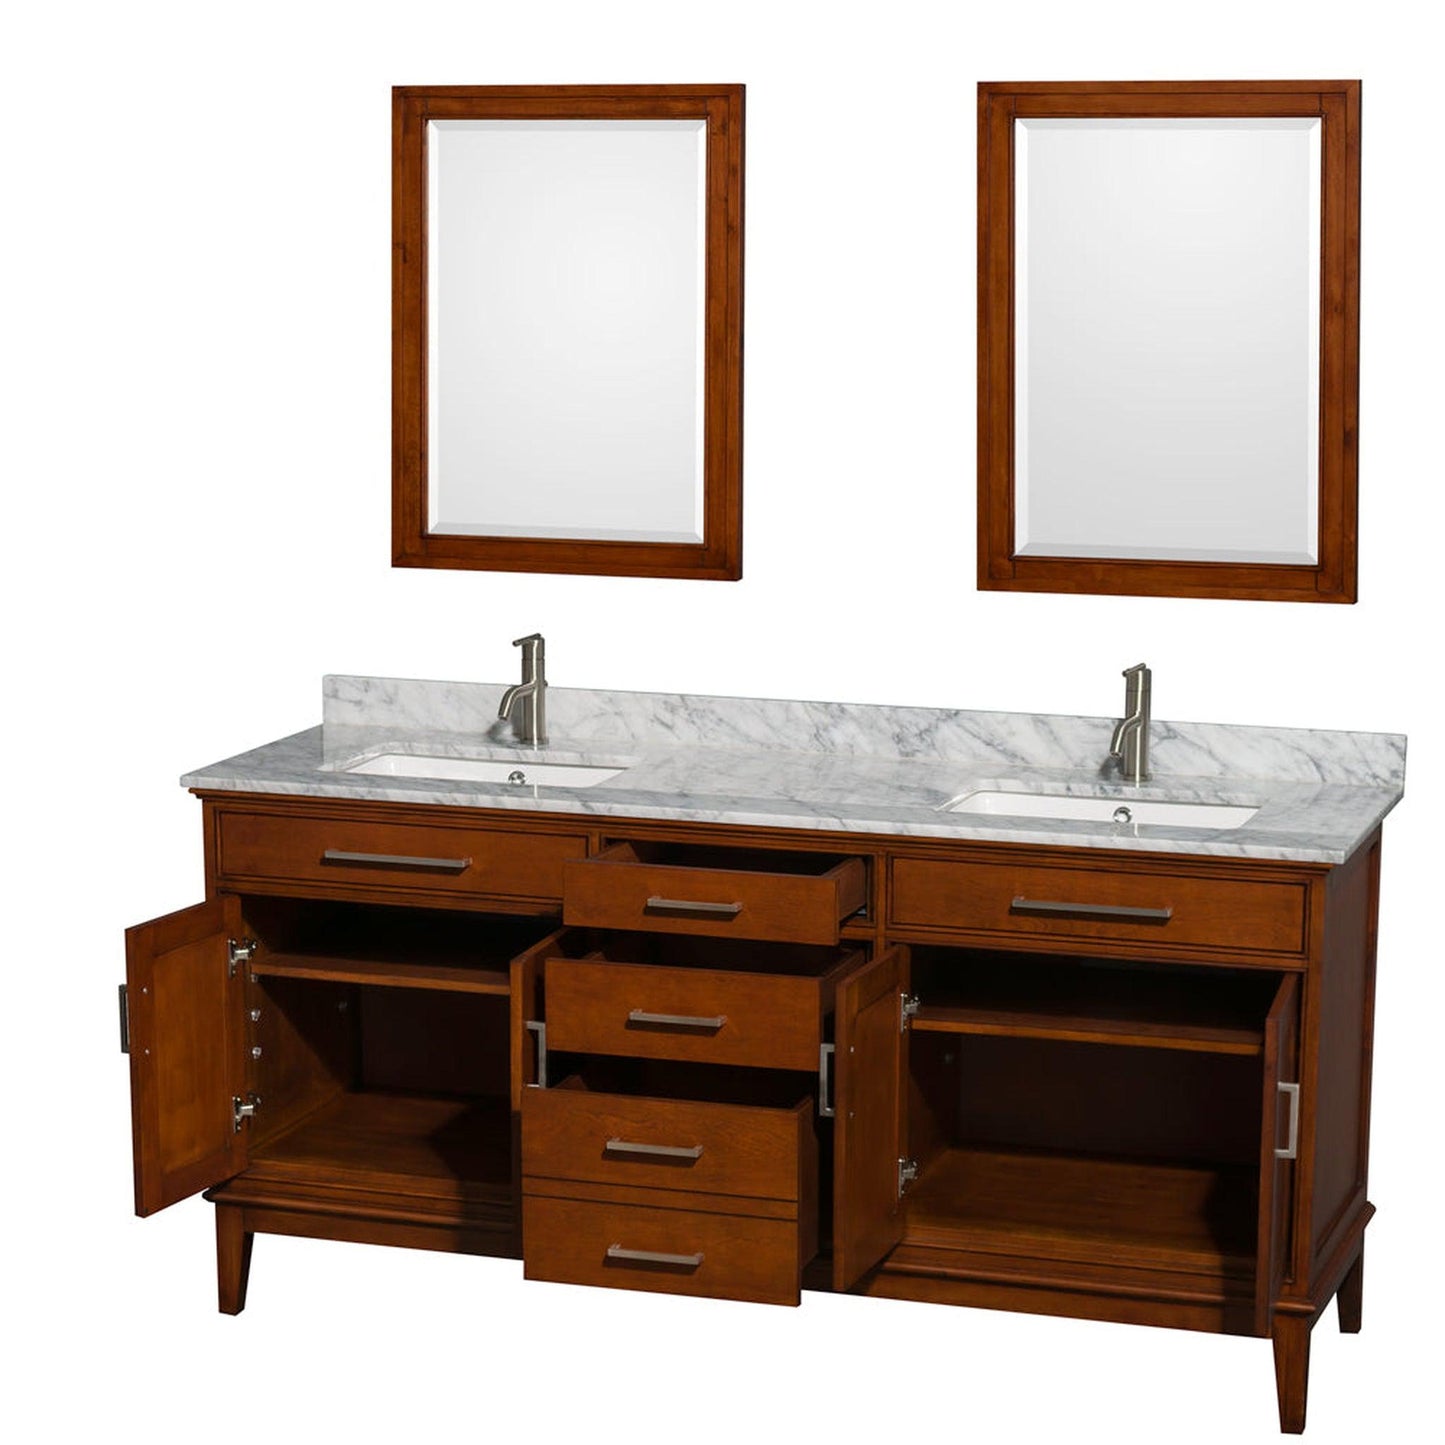 Wyndham Collection Hatton 72" Double Bathroom Vanity in Light Chestnut, White Carrara Marble Countertop, Undermount Square Sinks, and 24" Mirror